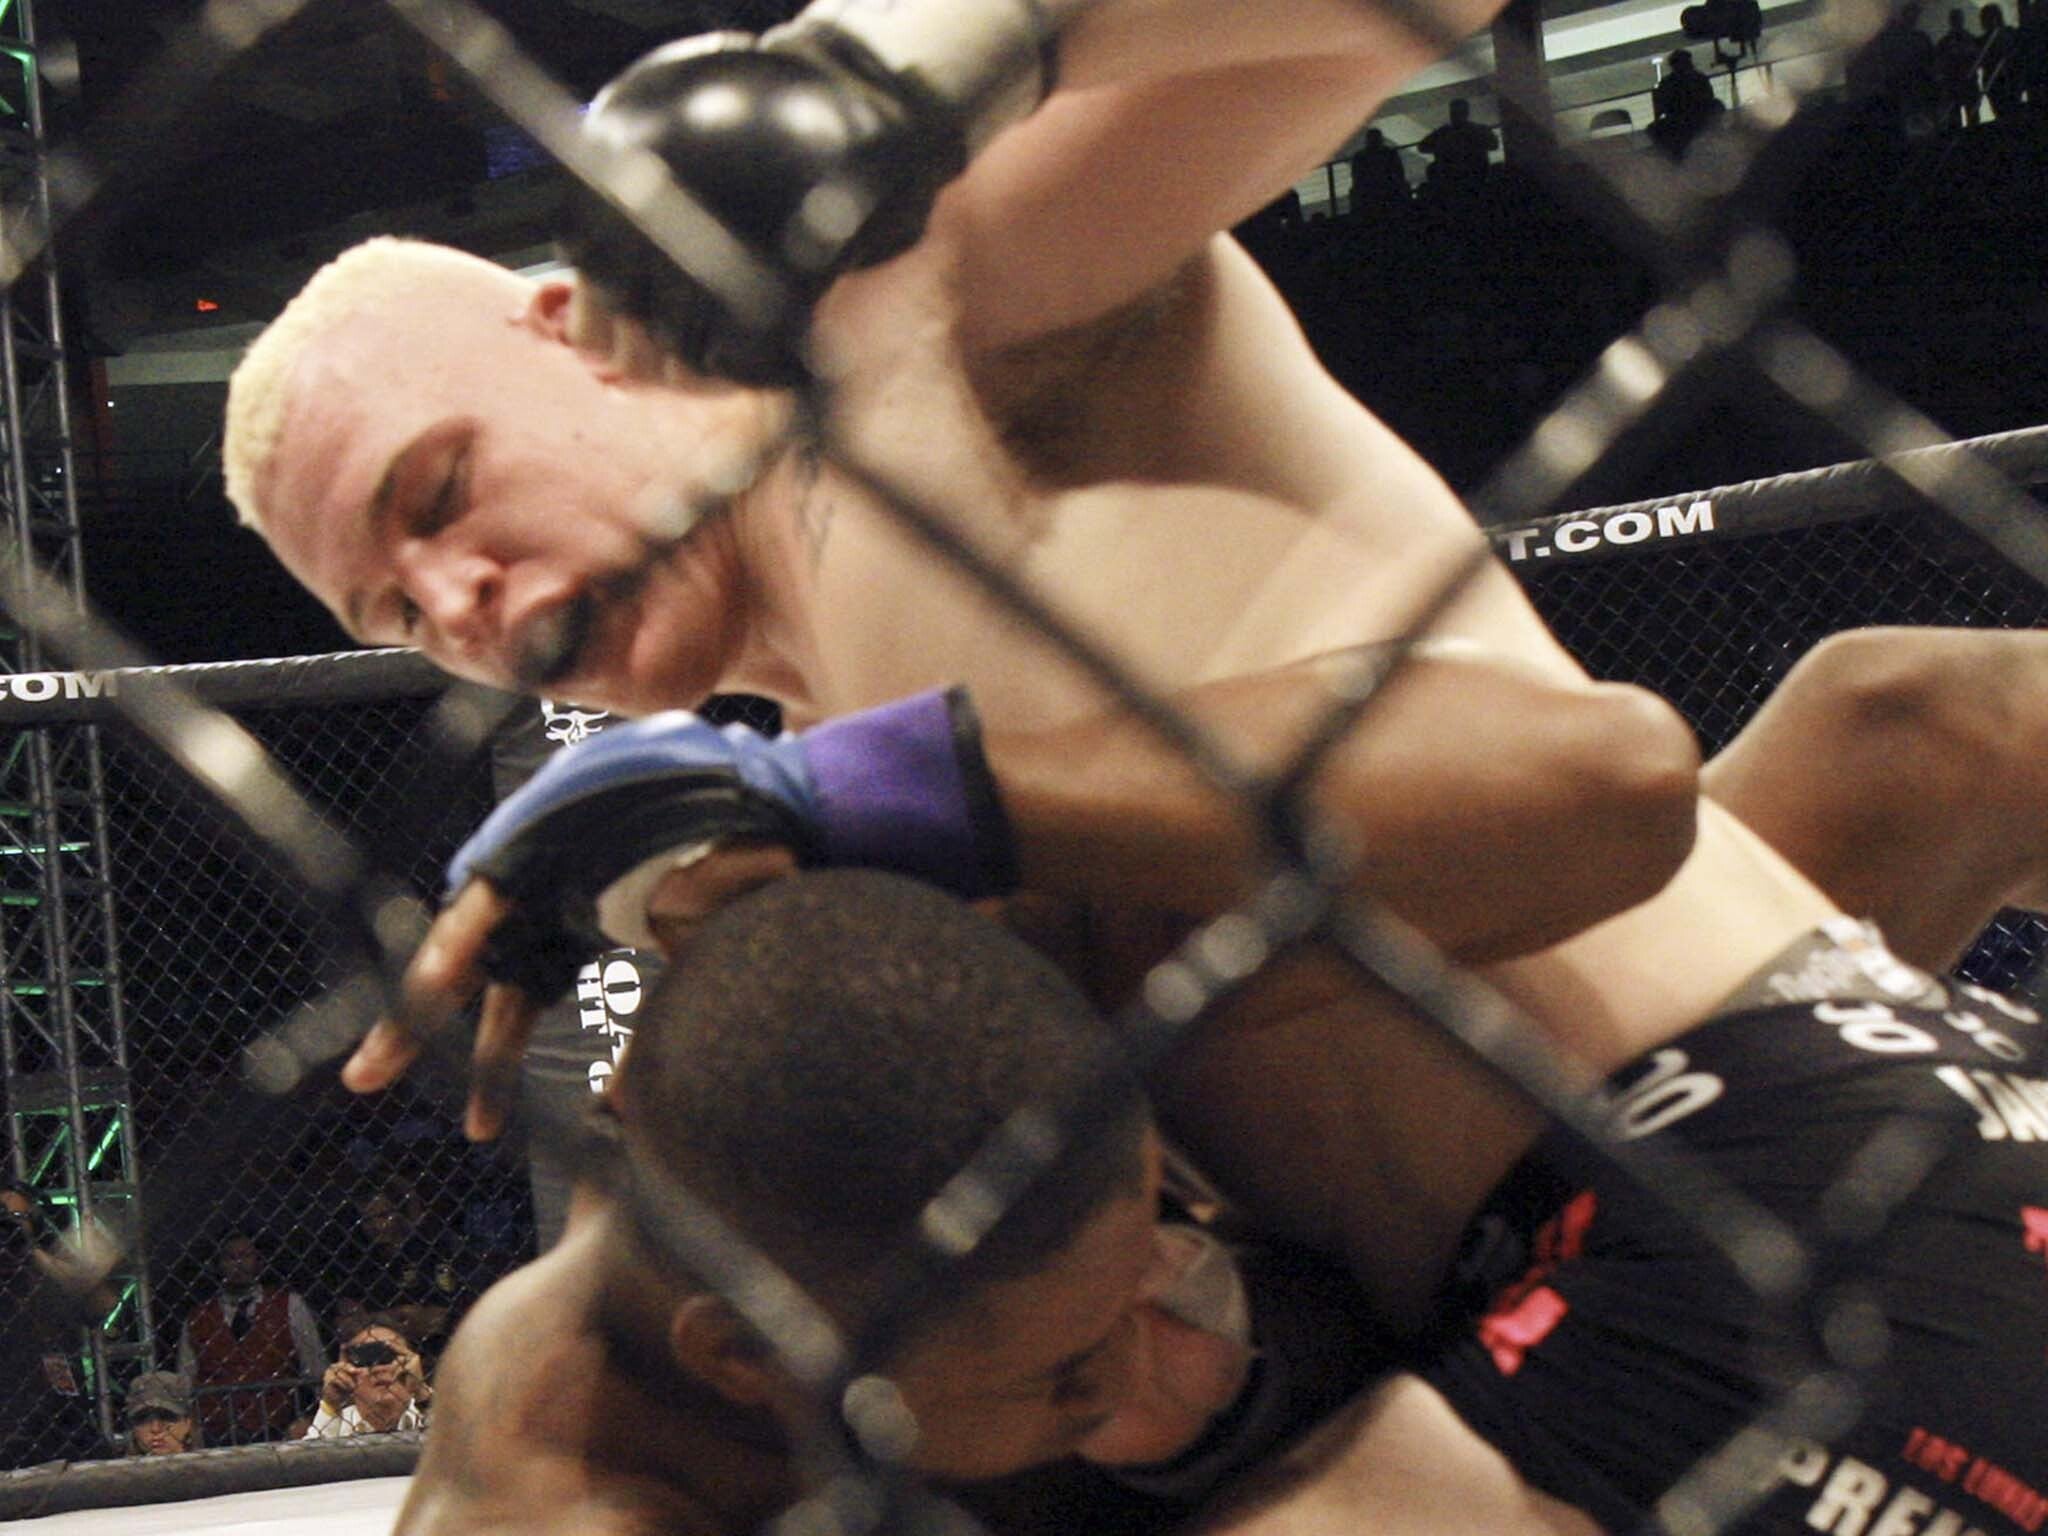 File Image: Tyler East of Albuquerque, top , pounds on Prince McLean of Cincinnati, Ohio in the Heavy weight 265 lbs. match during the MMA Fight Pit Genesis on Saturday, 13 August 2011